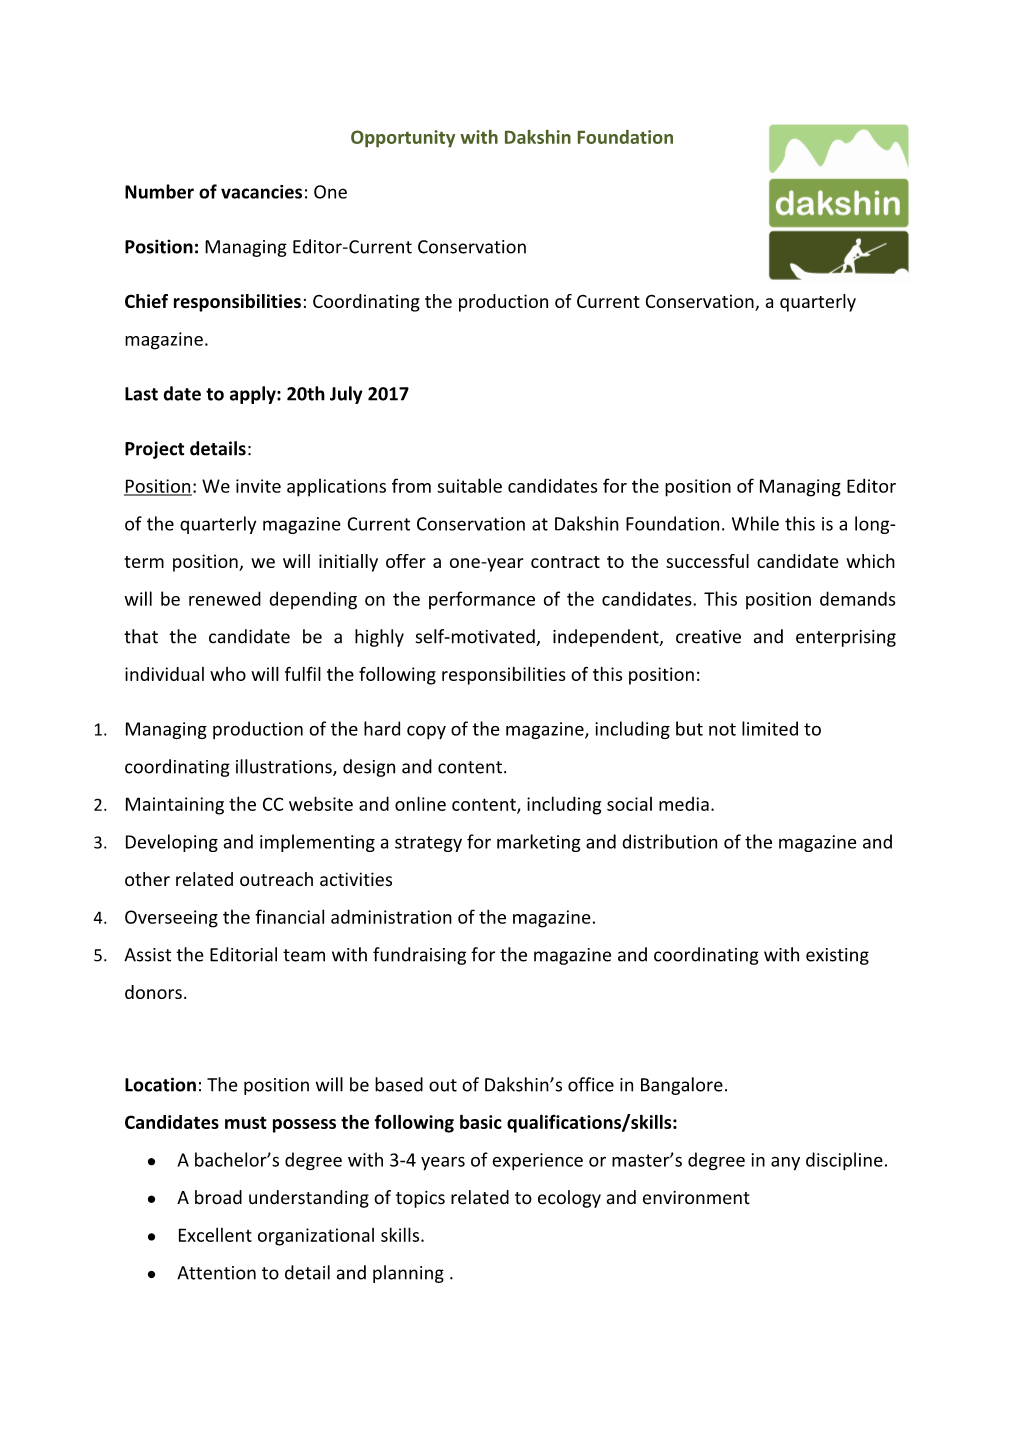 Position:Managing Editor-Current Conservation